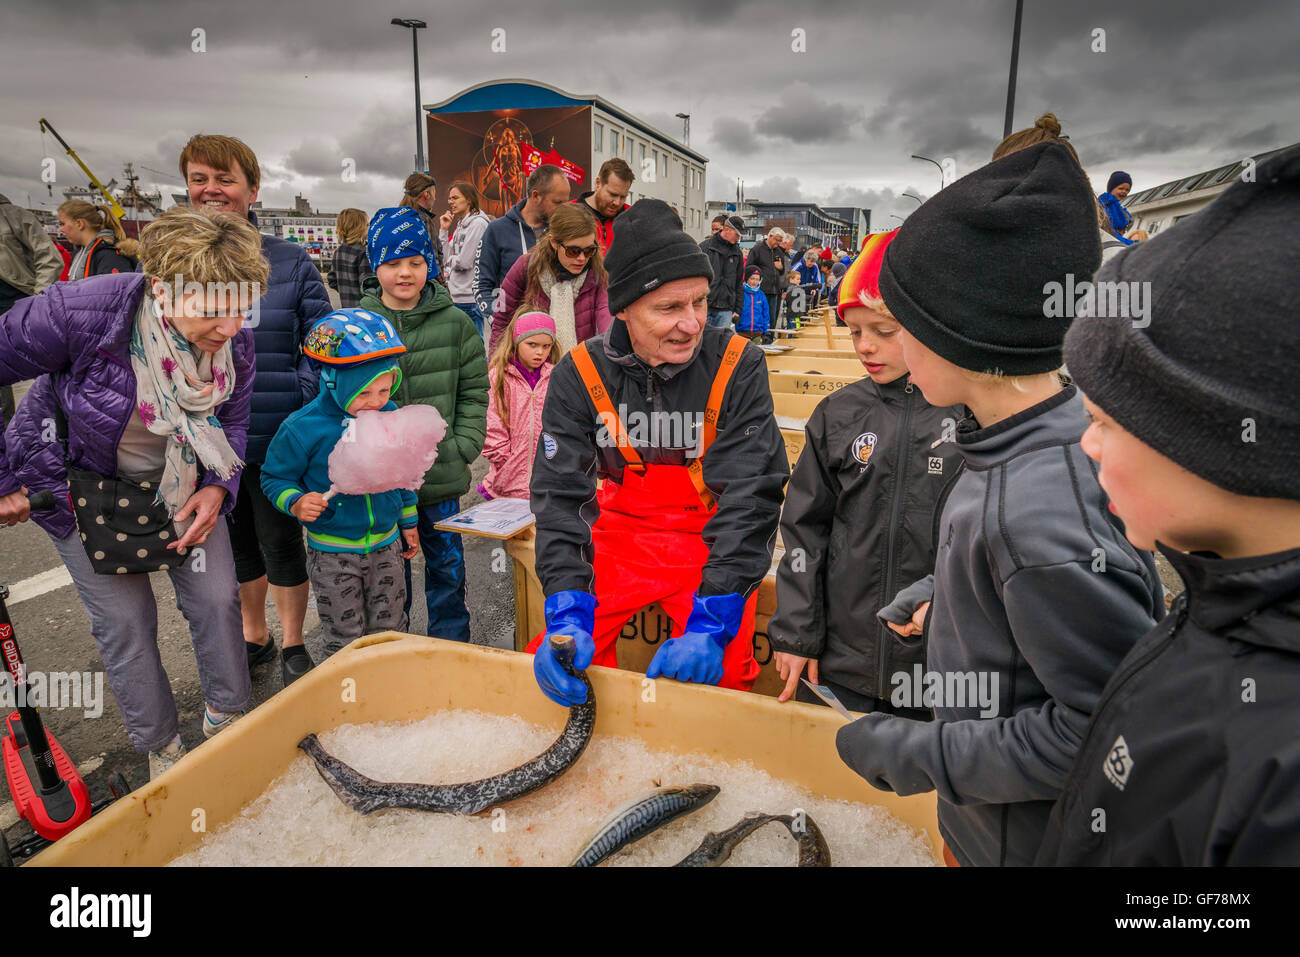 Fisherman showing fish at The Annual Seaman's Festival, Reykjavik, Iceland Stock Photo